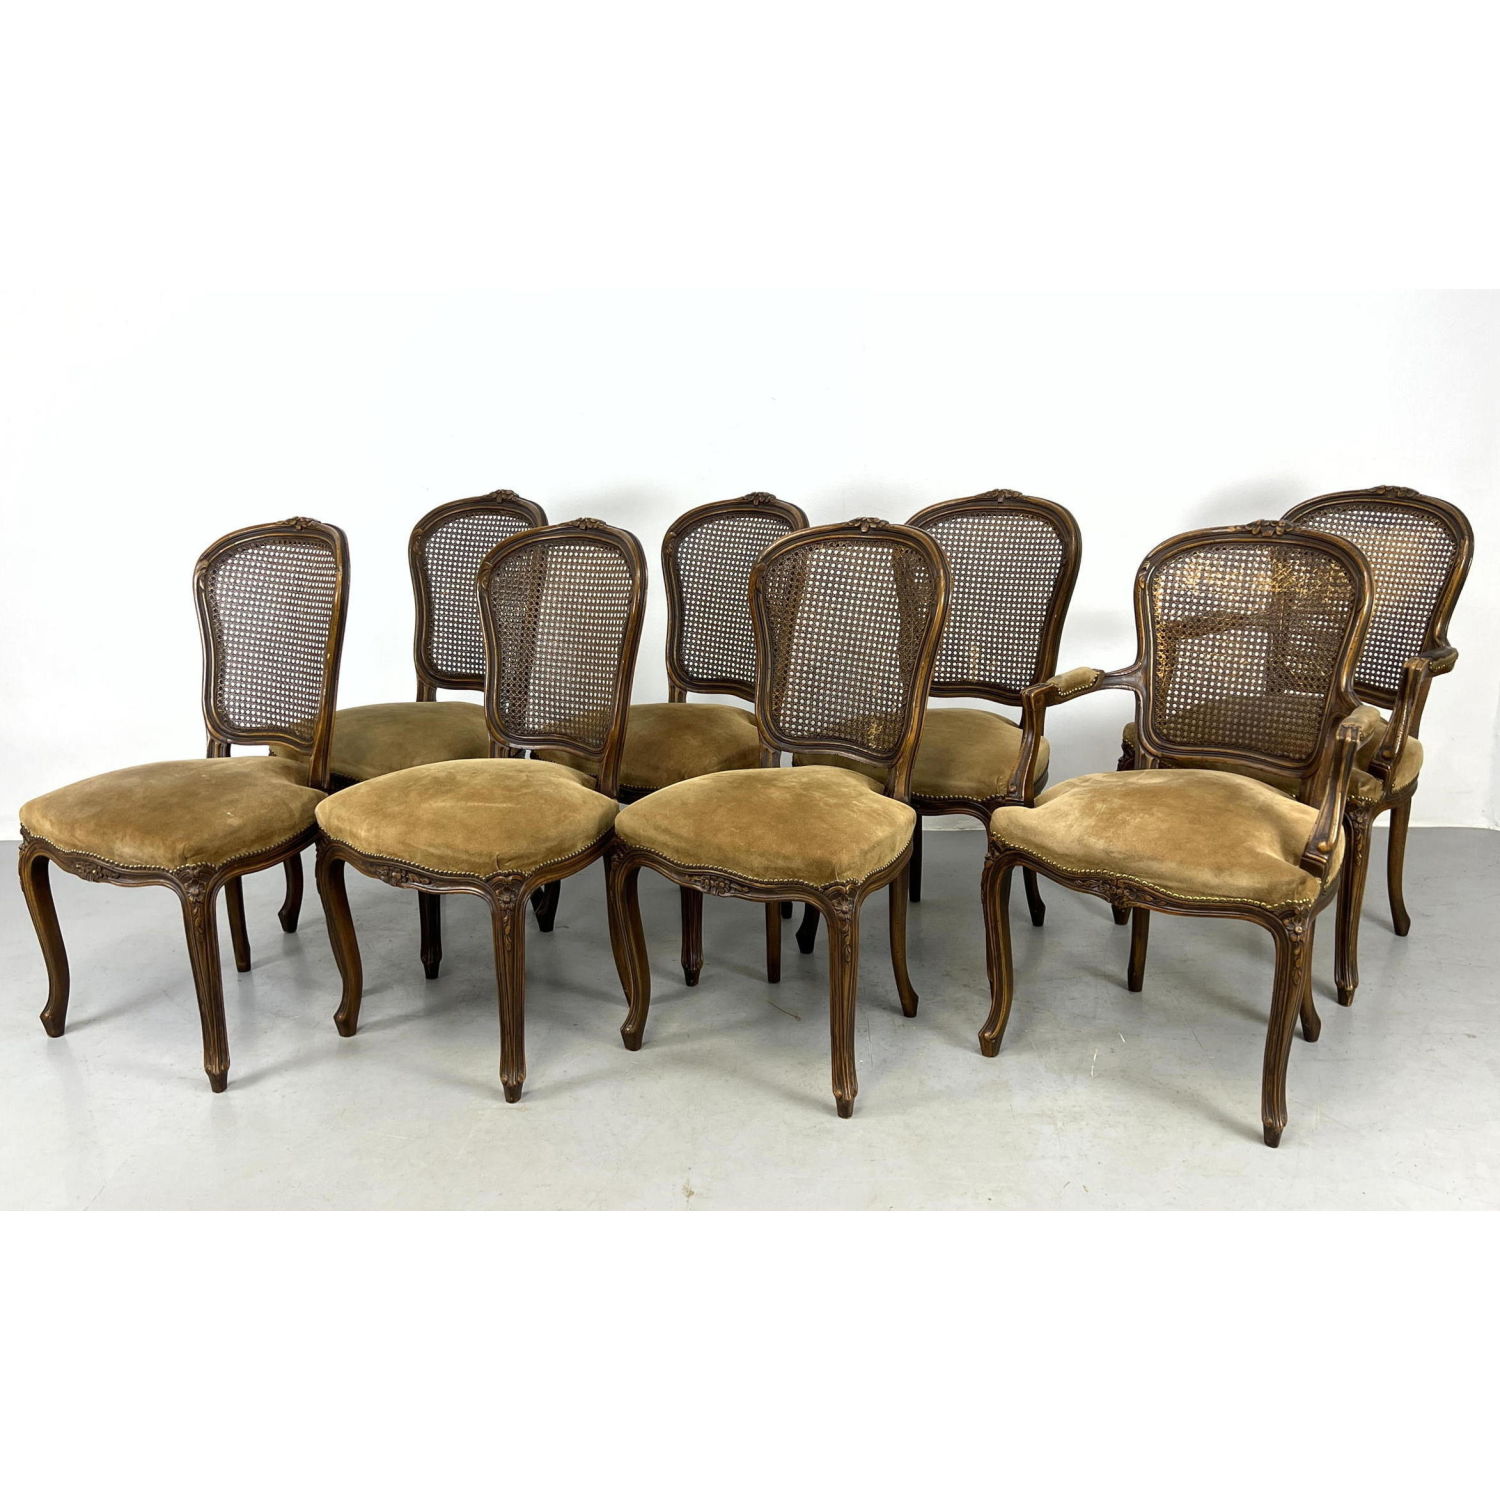 Set 8 French Style Dining Chairs.